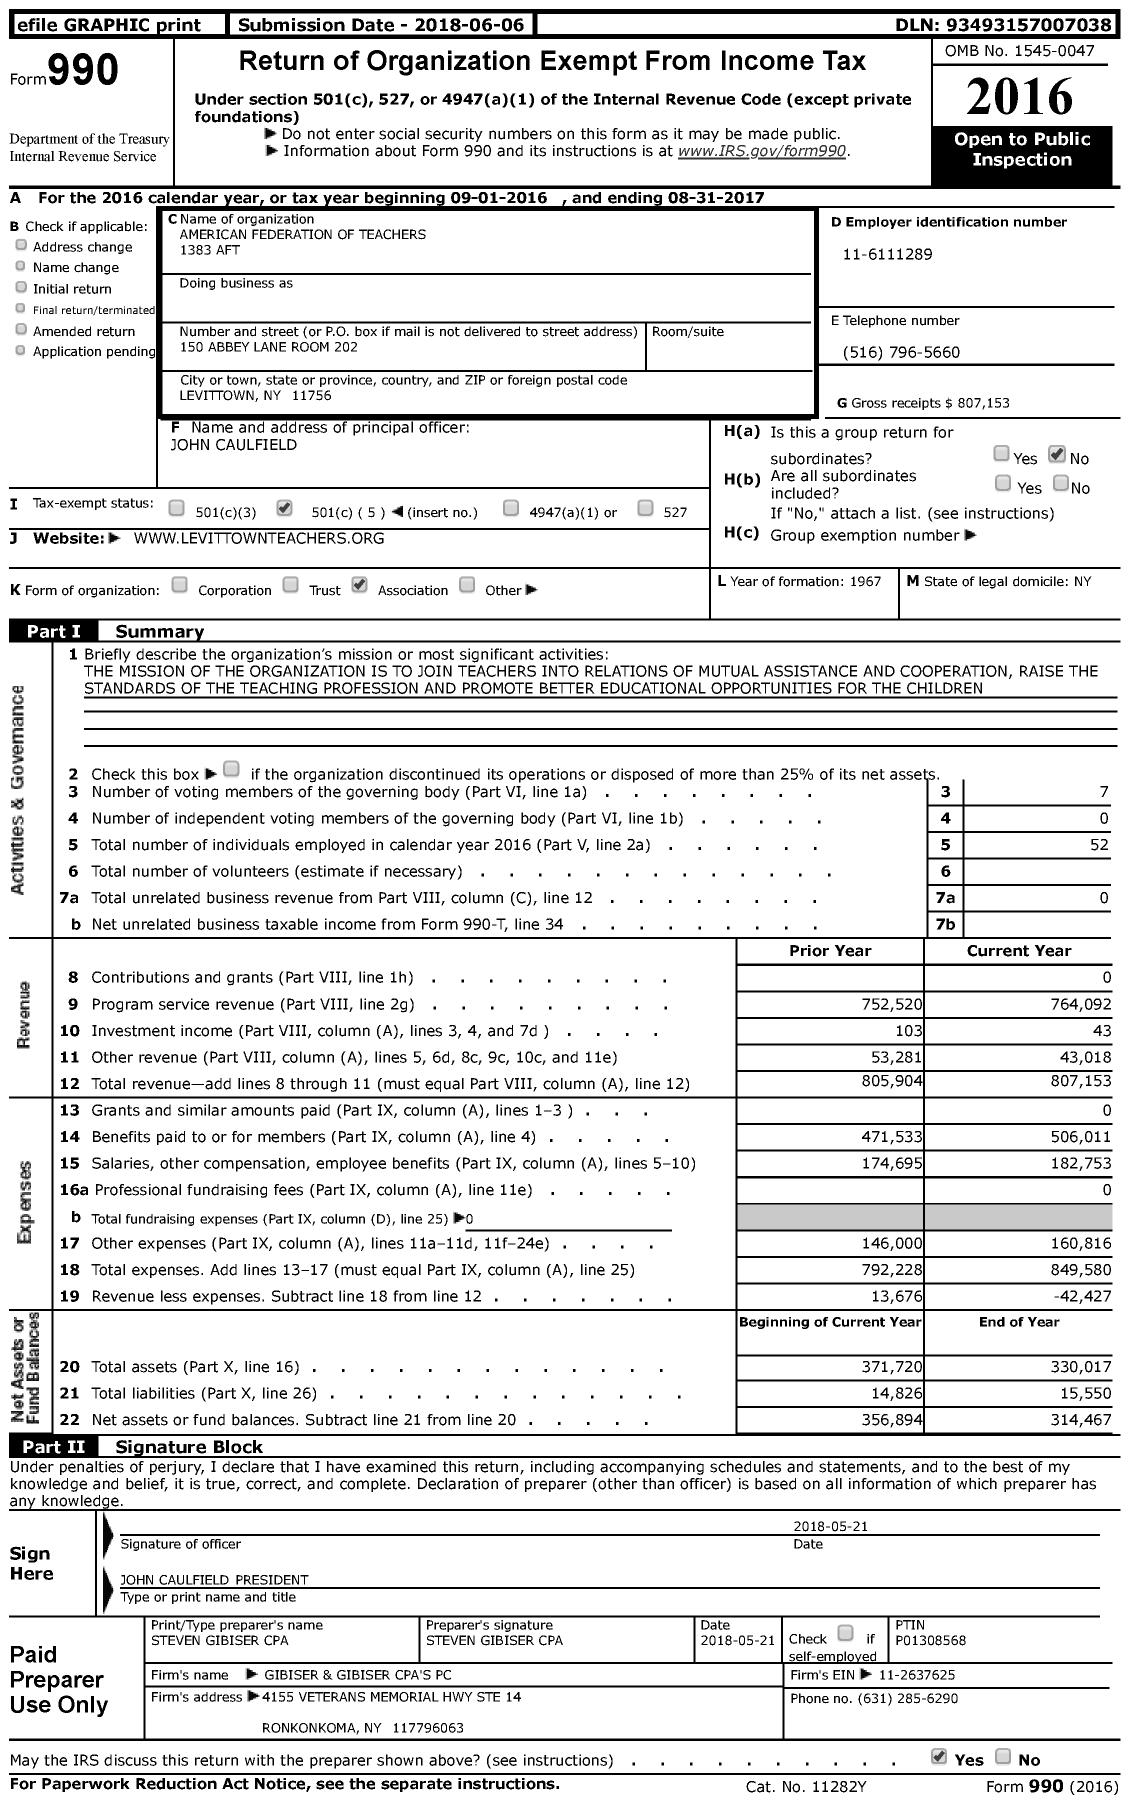 Image of first page of 2016 Form 990 for American Federation of Teachers 1383 (AFT)